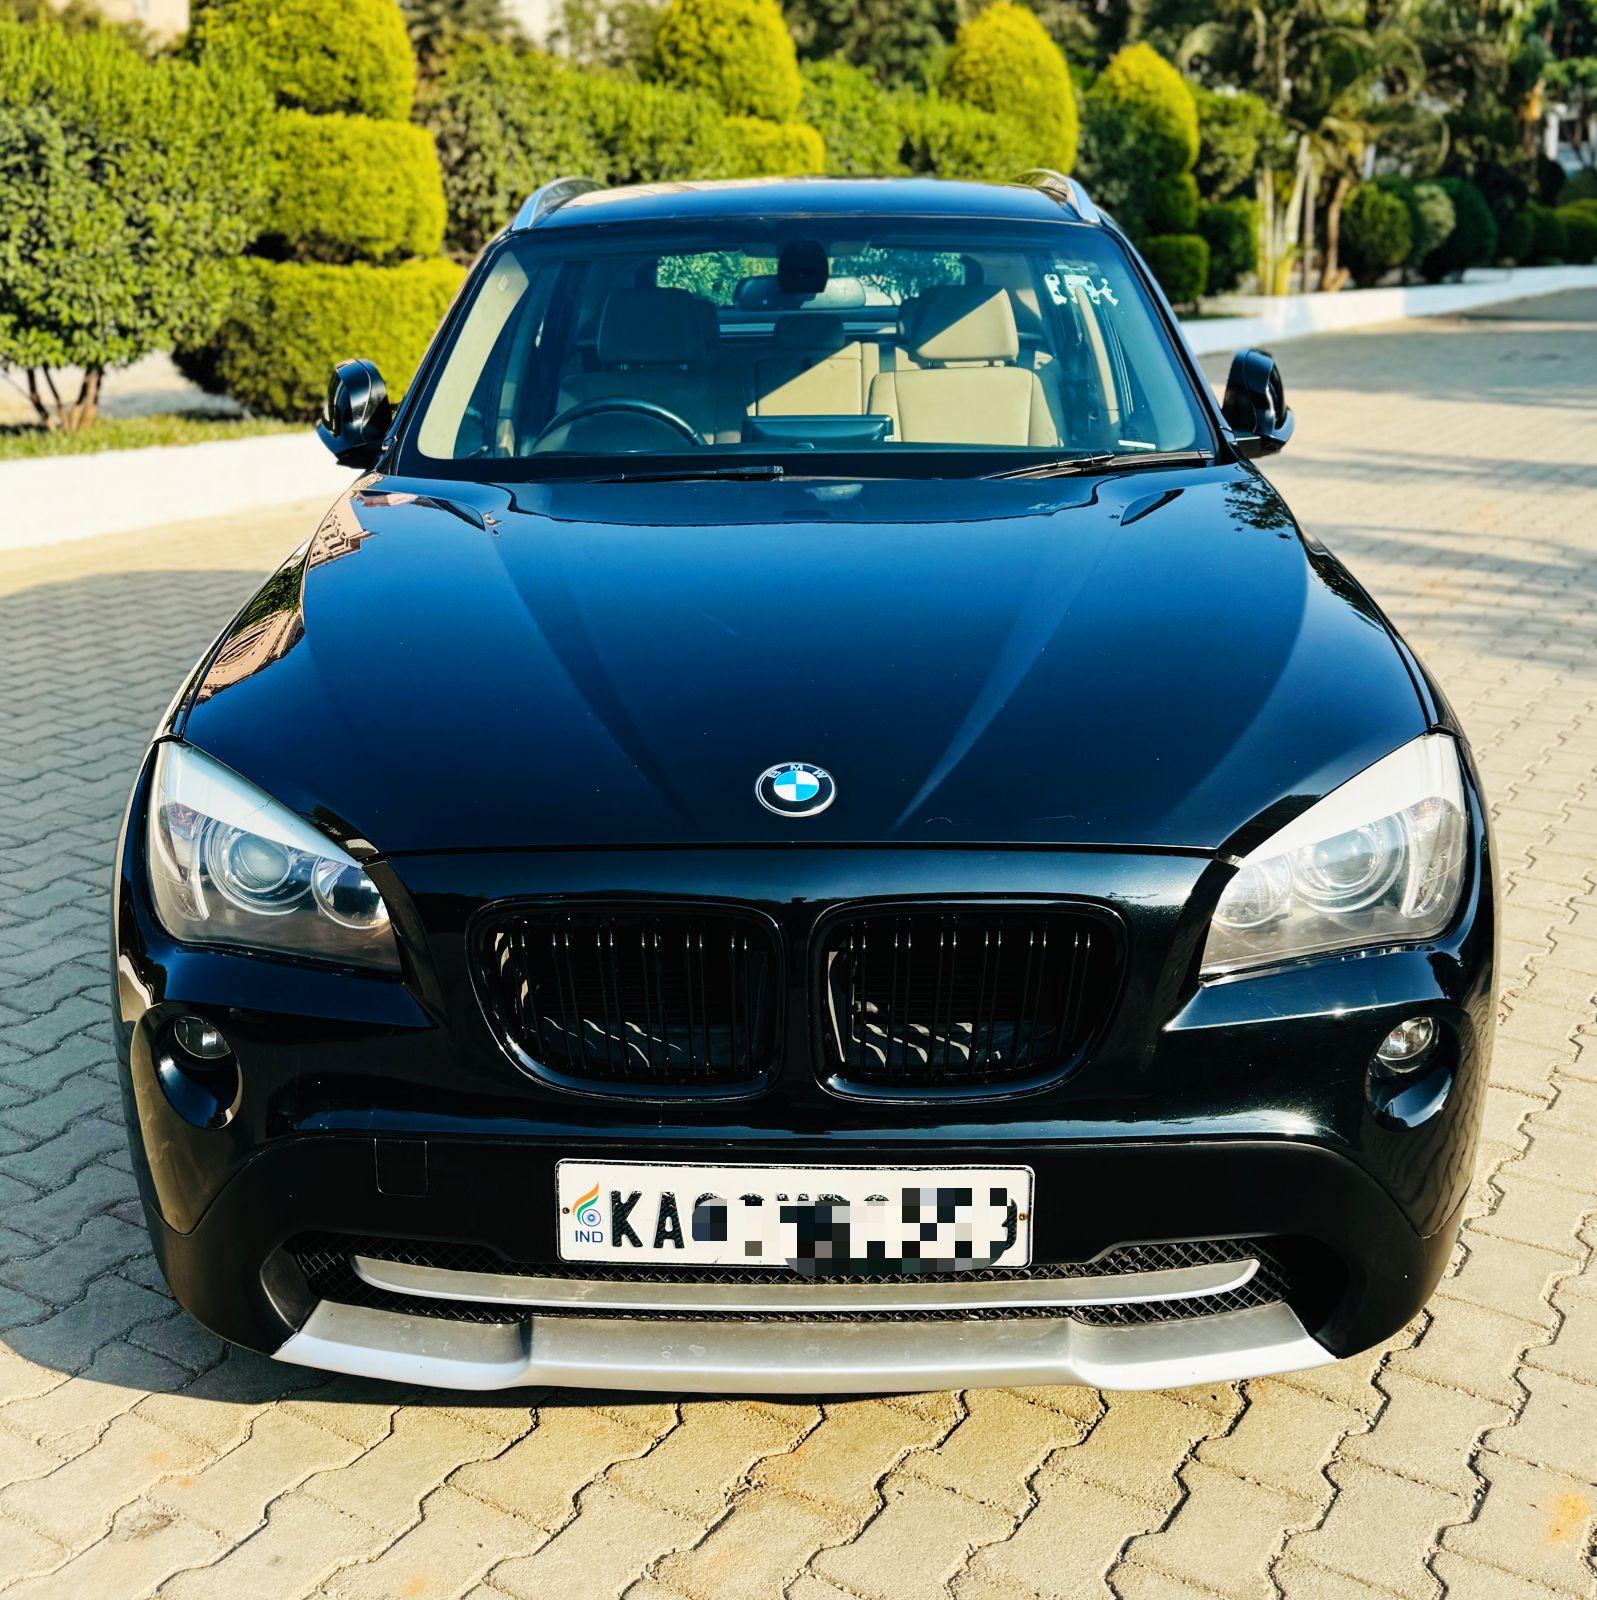 BMW X1 AT 2013 Diesel 2.0Ltr S-Drive Corporate Edition